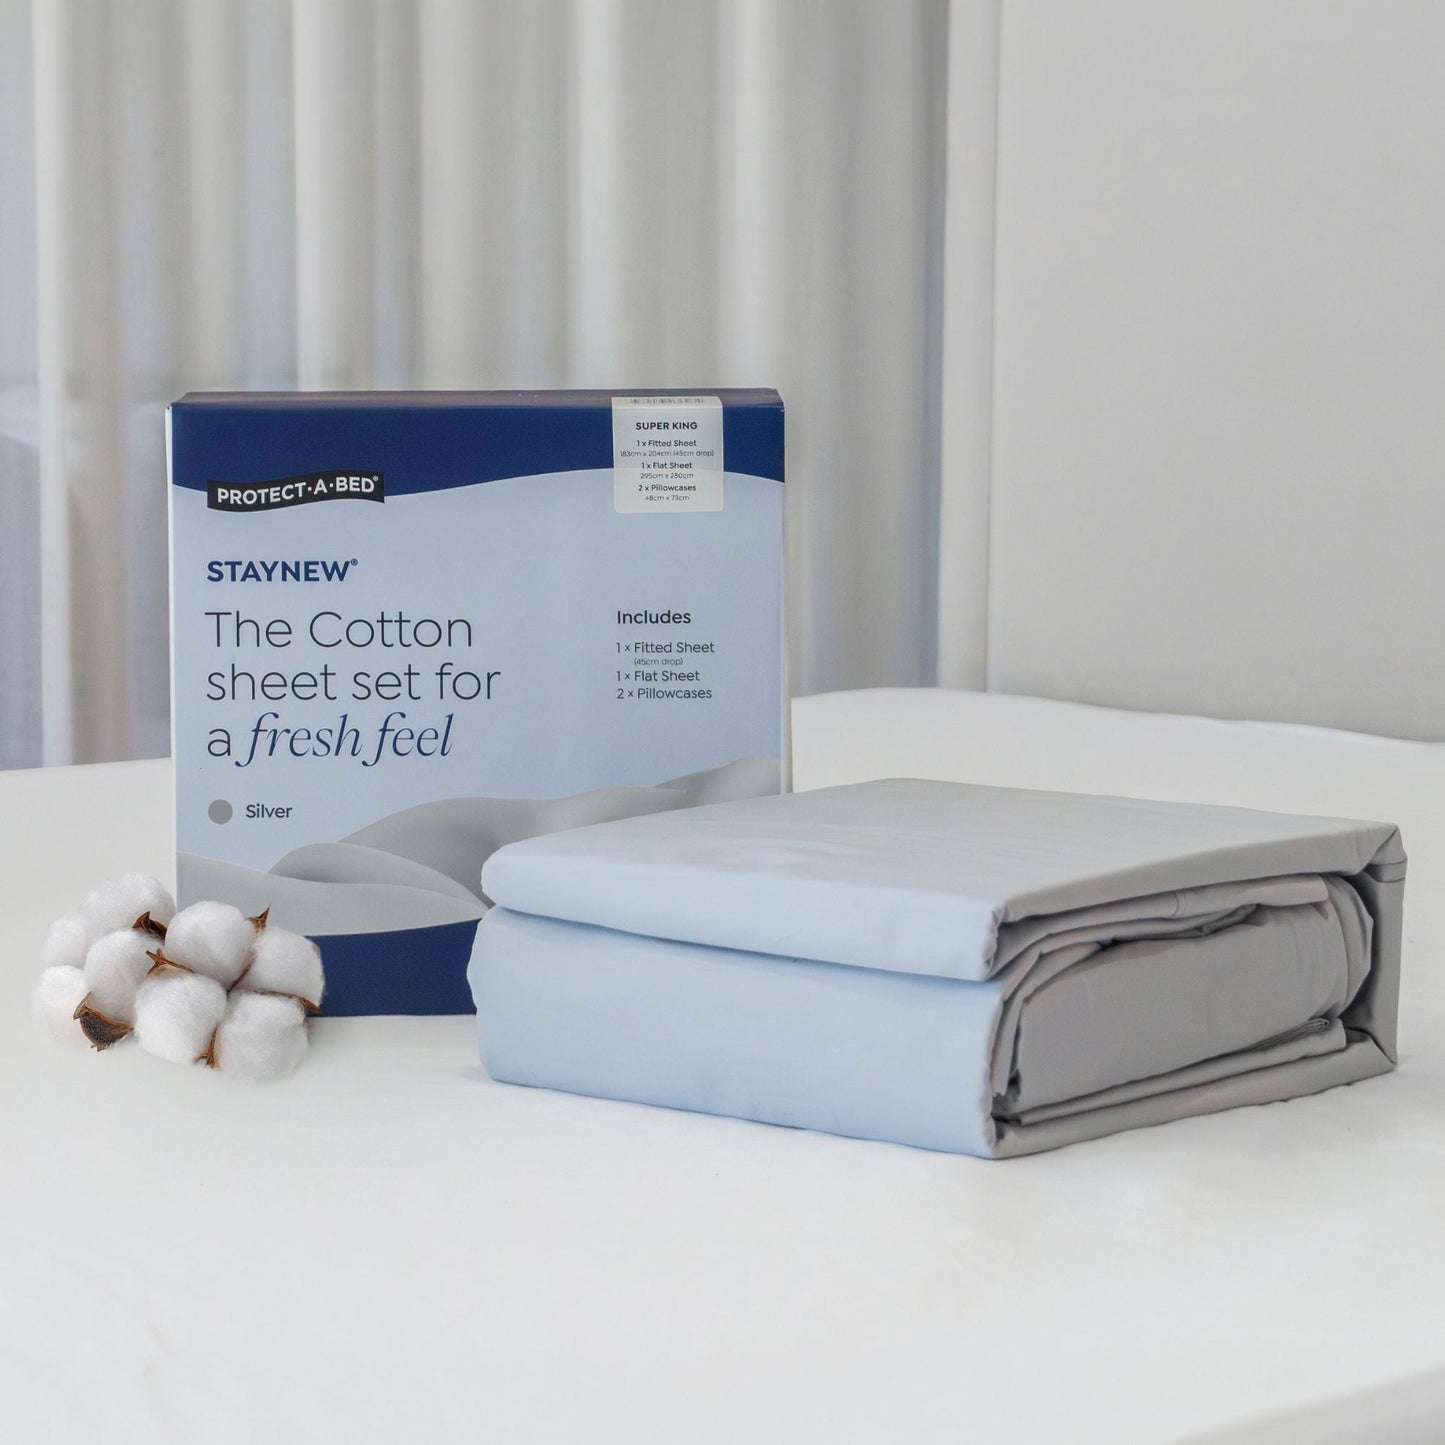 Protect-A-Bed Staynew® Cotton Sheet Set Single